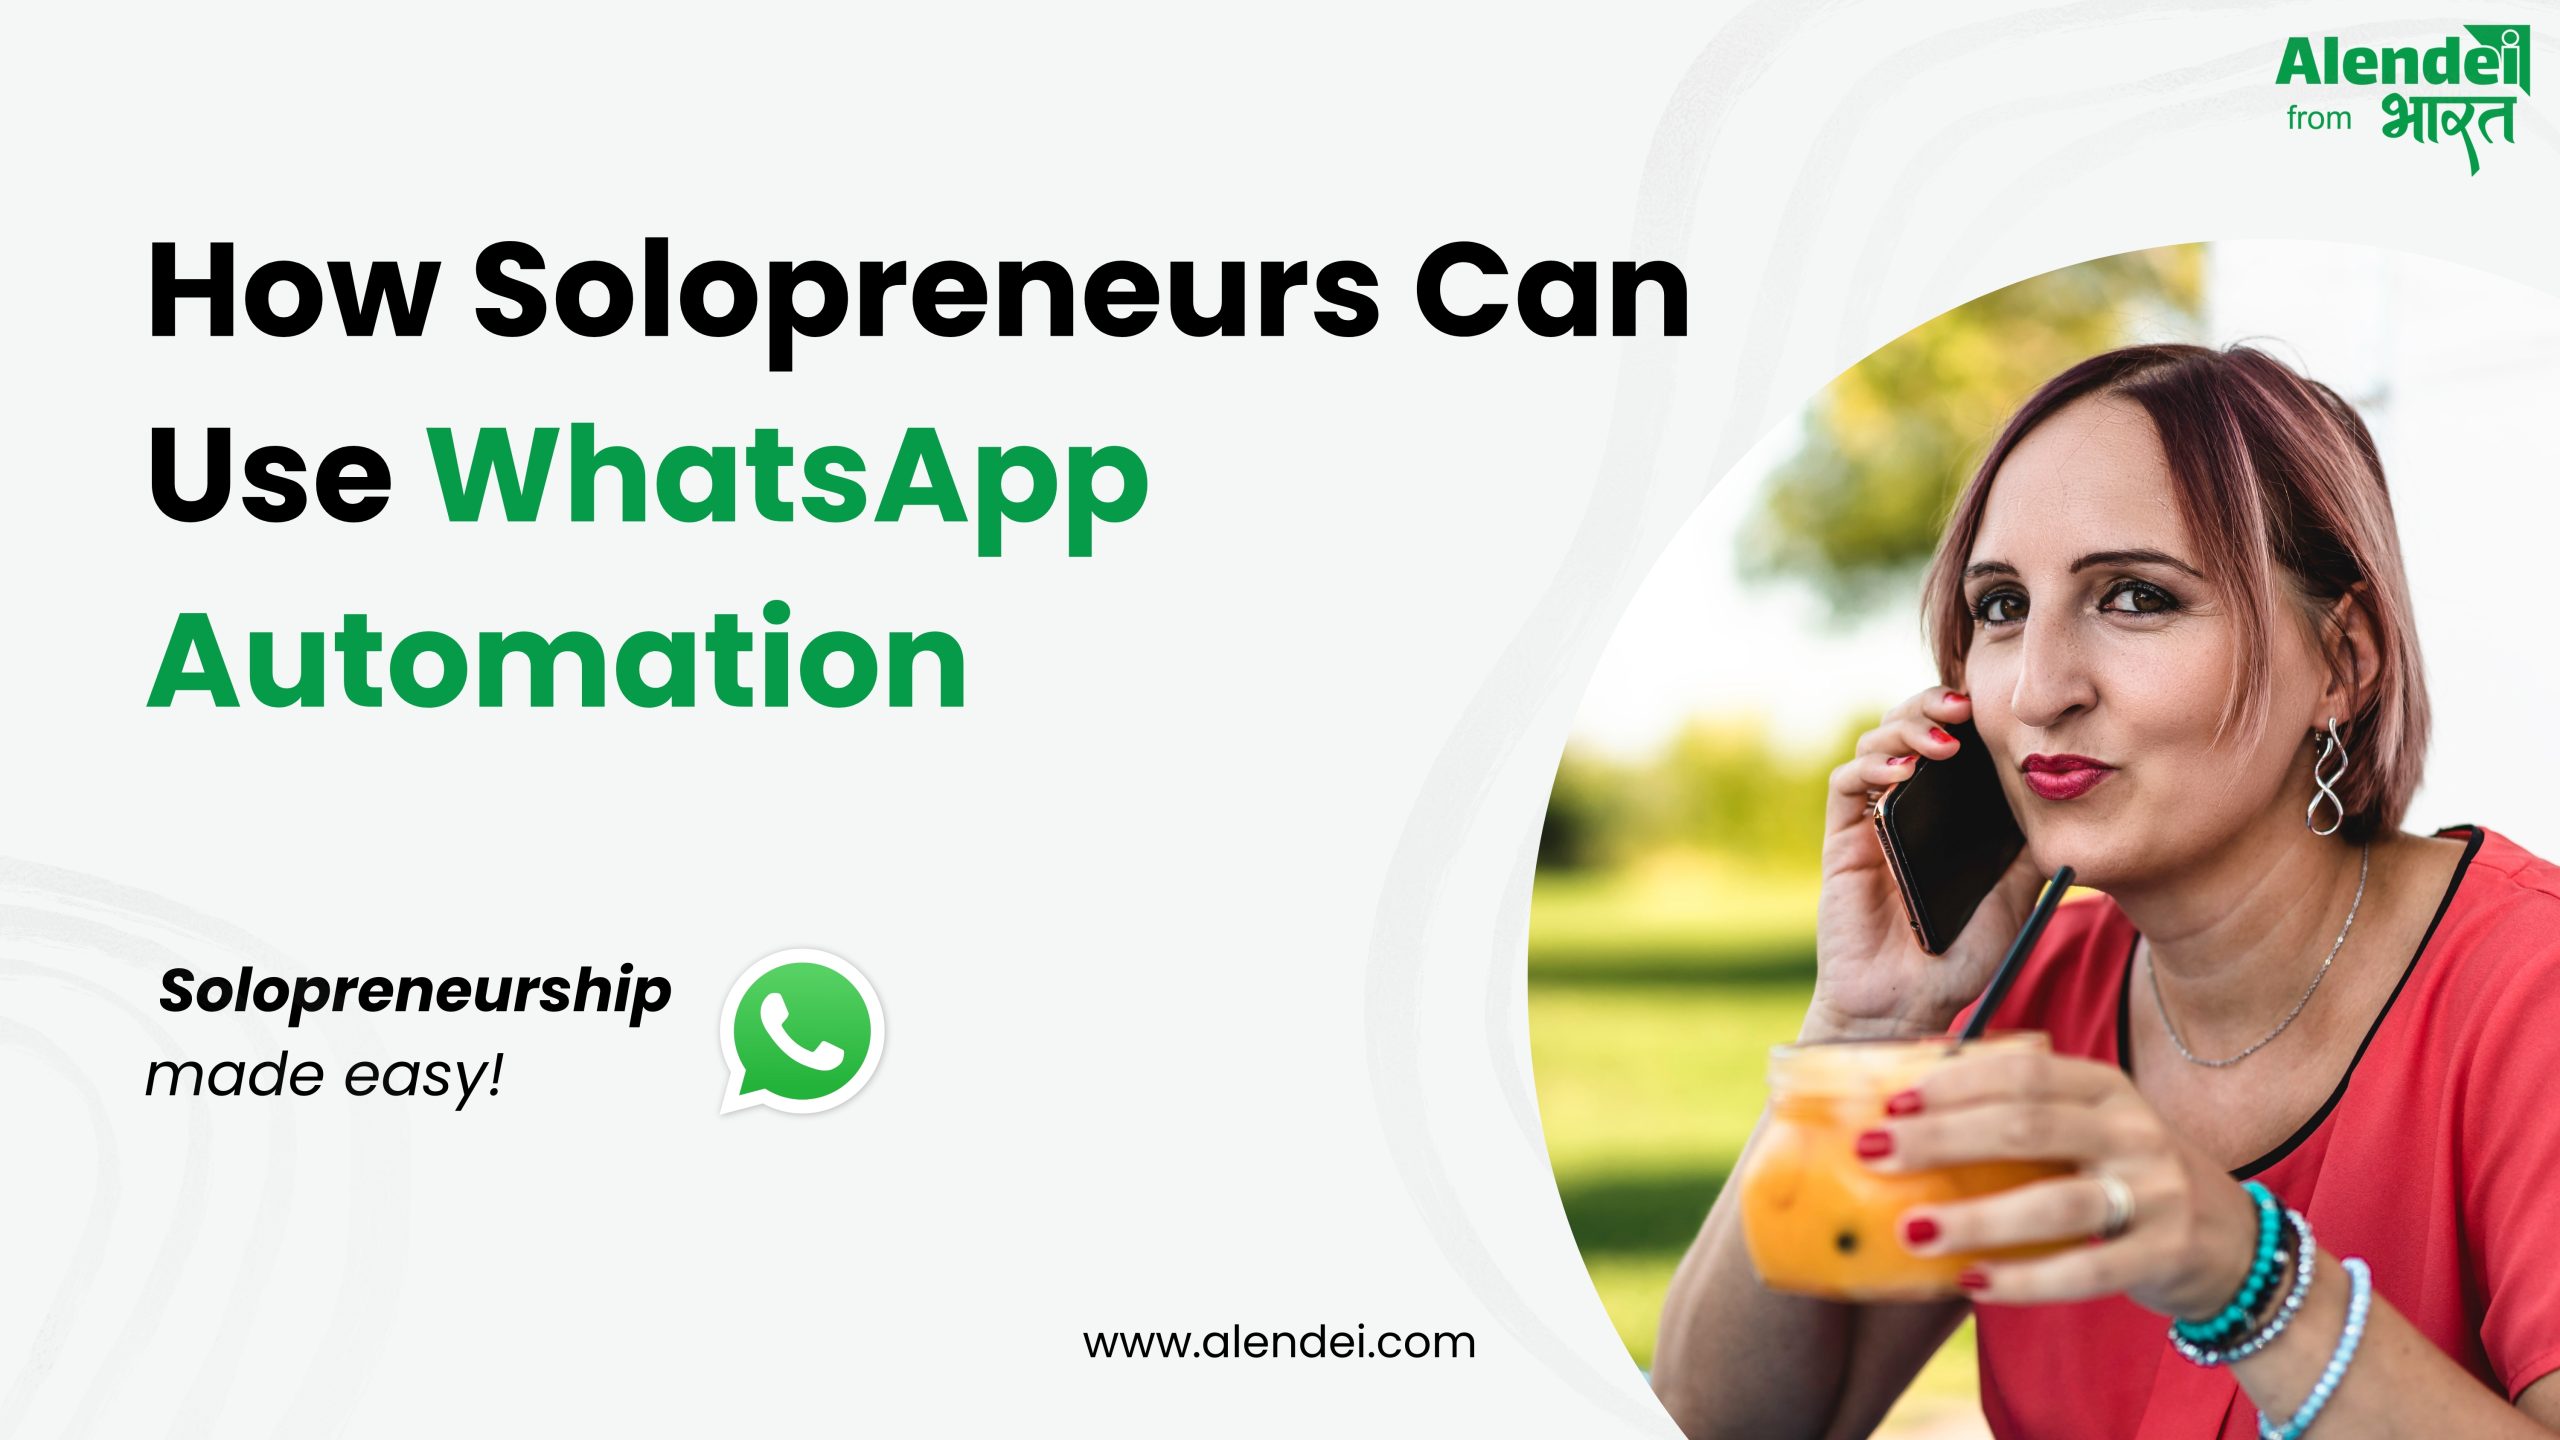 How Solopreneurs Can Use WhatsApp Automation